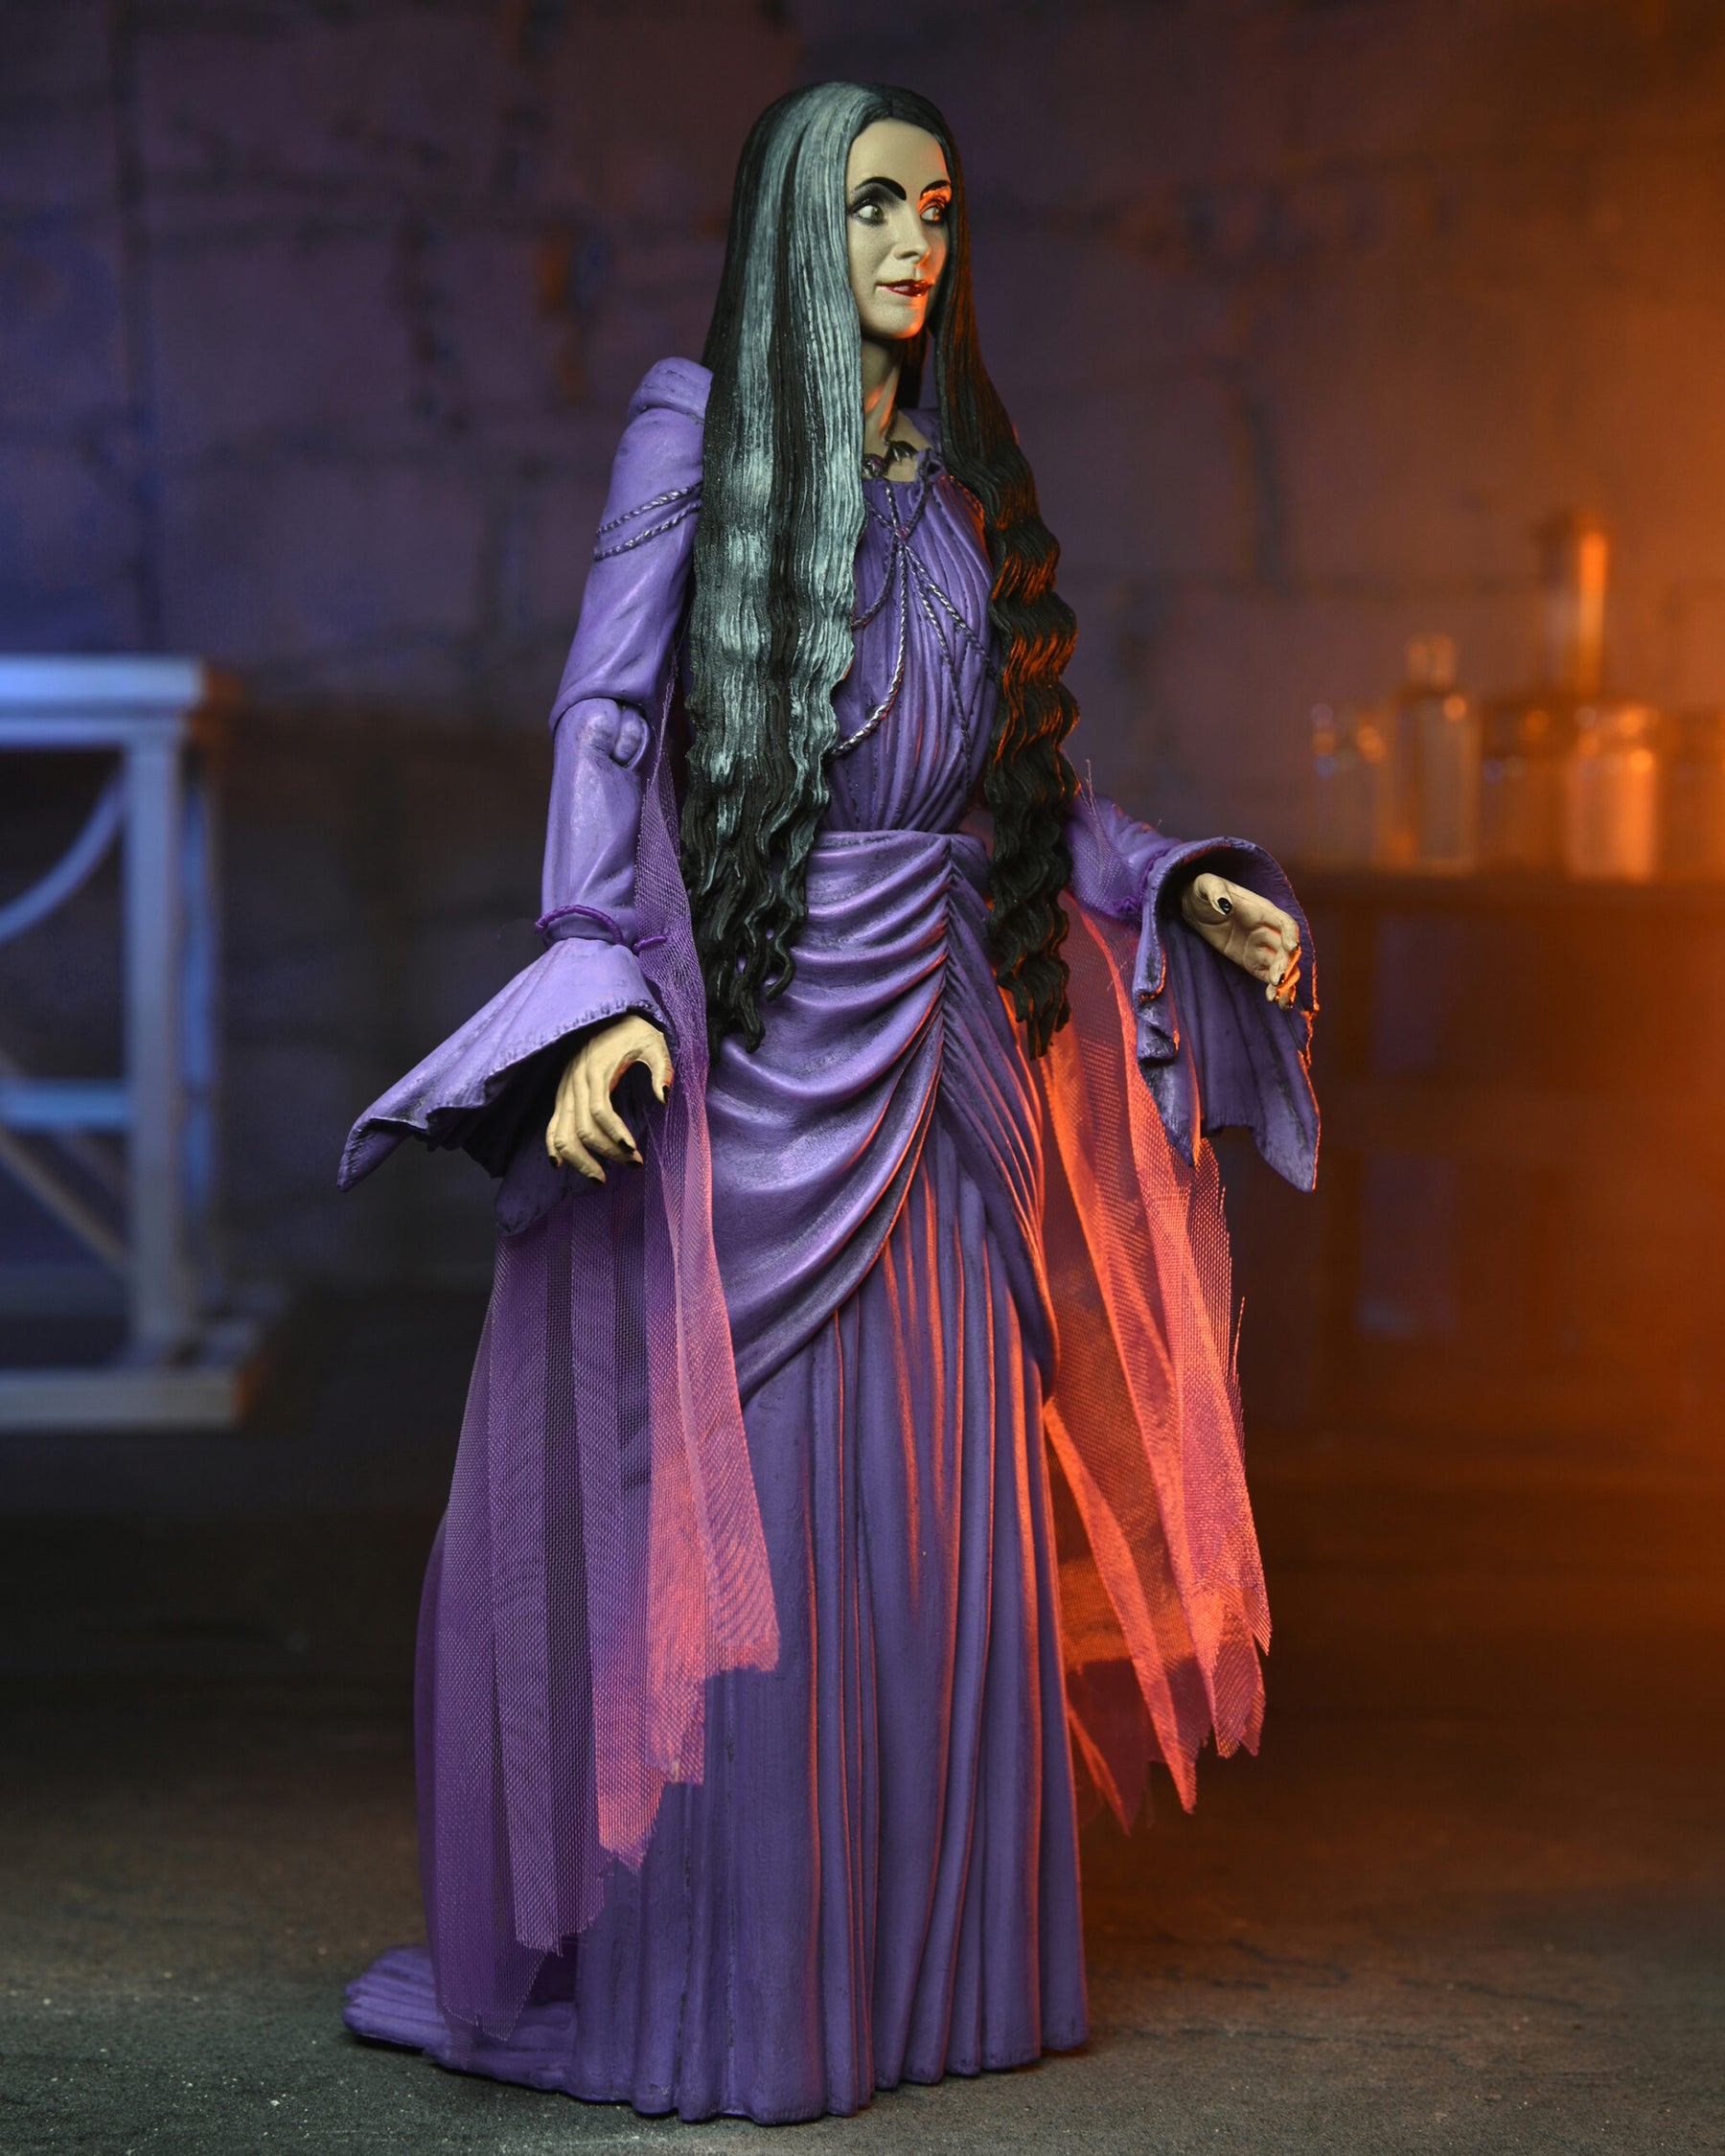 NECA - Rob Zombie’s The Munsters - Ultimate Lily Munster 7" Action Figure (Pre-Order Ships December)